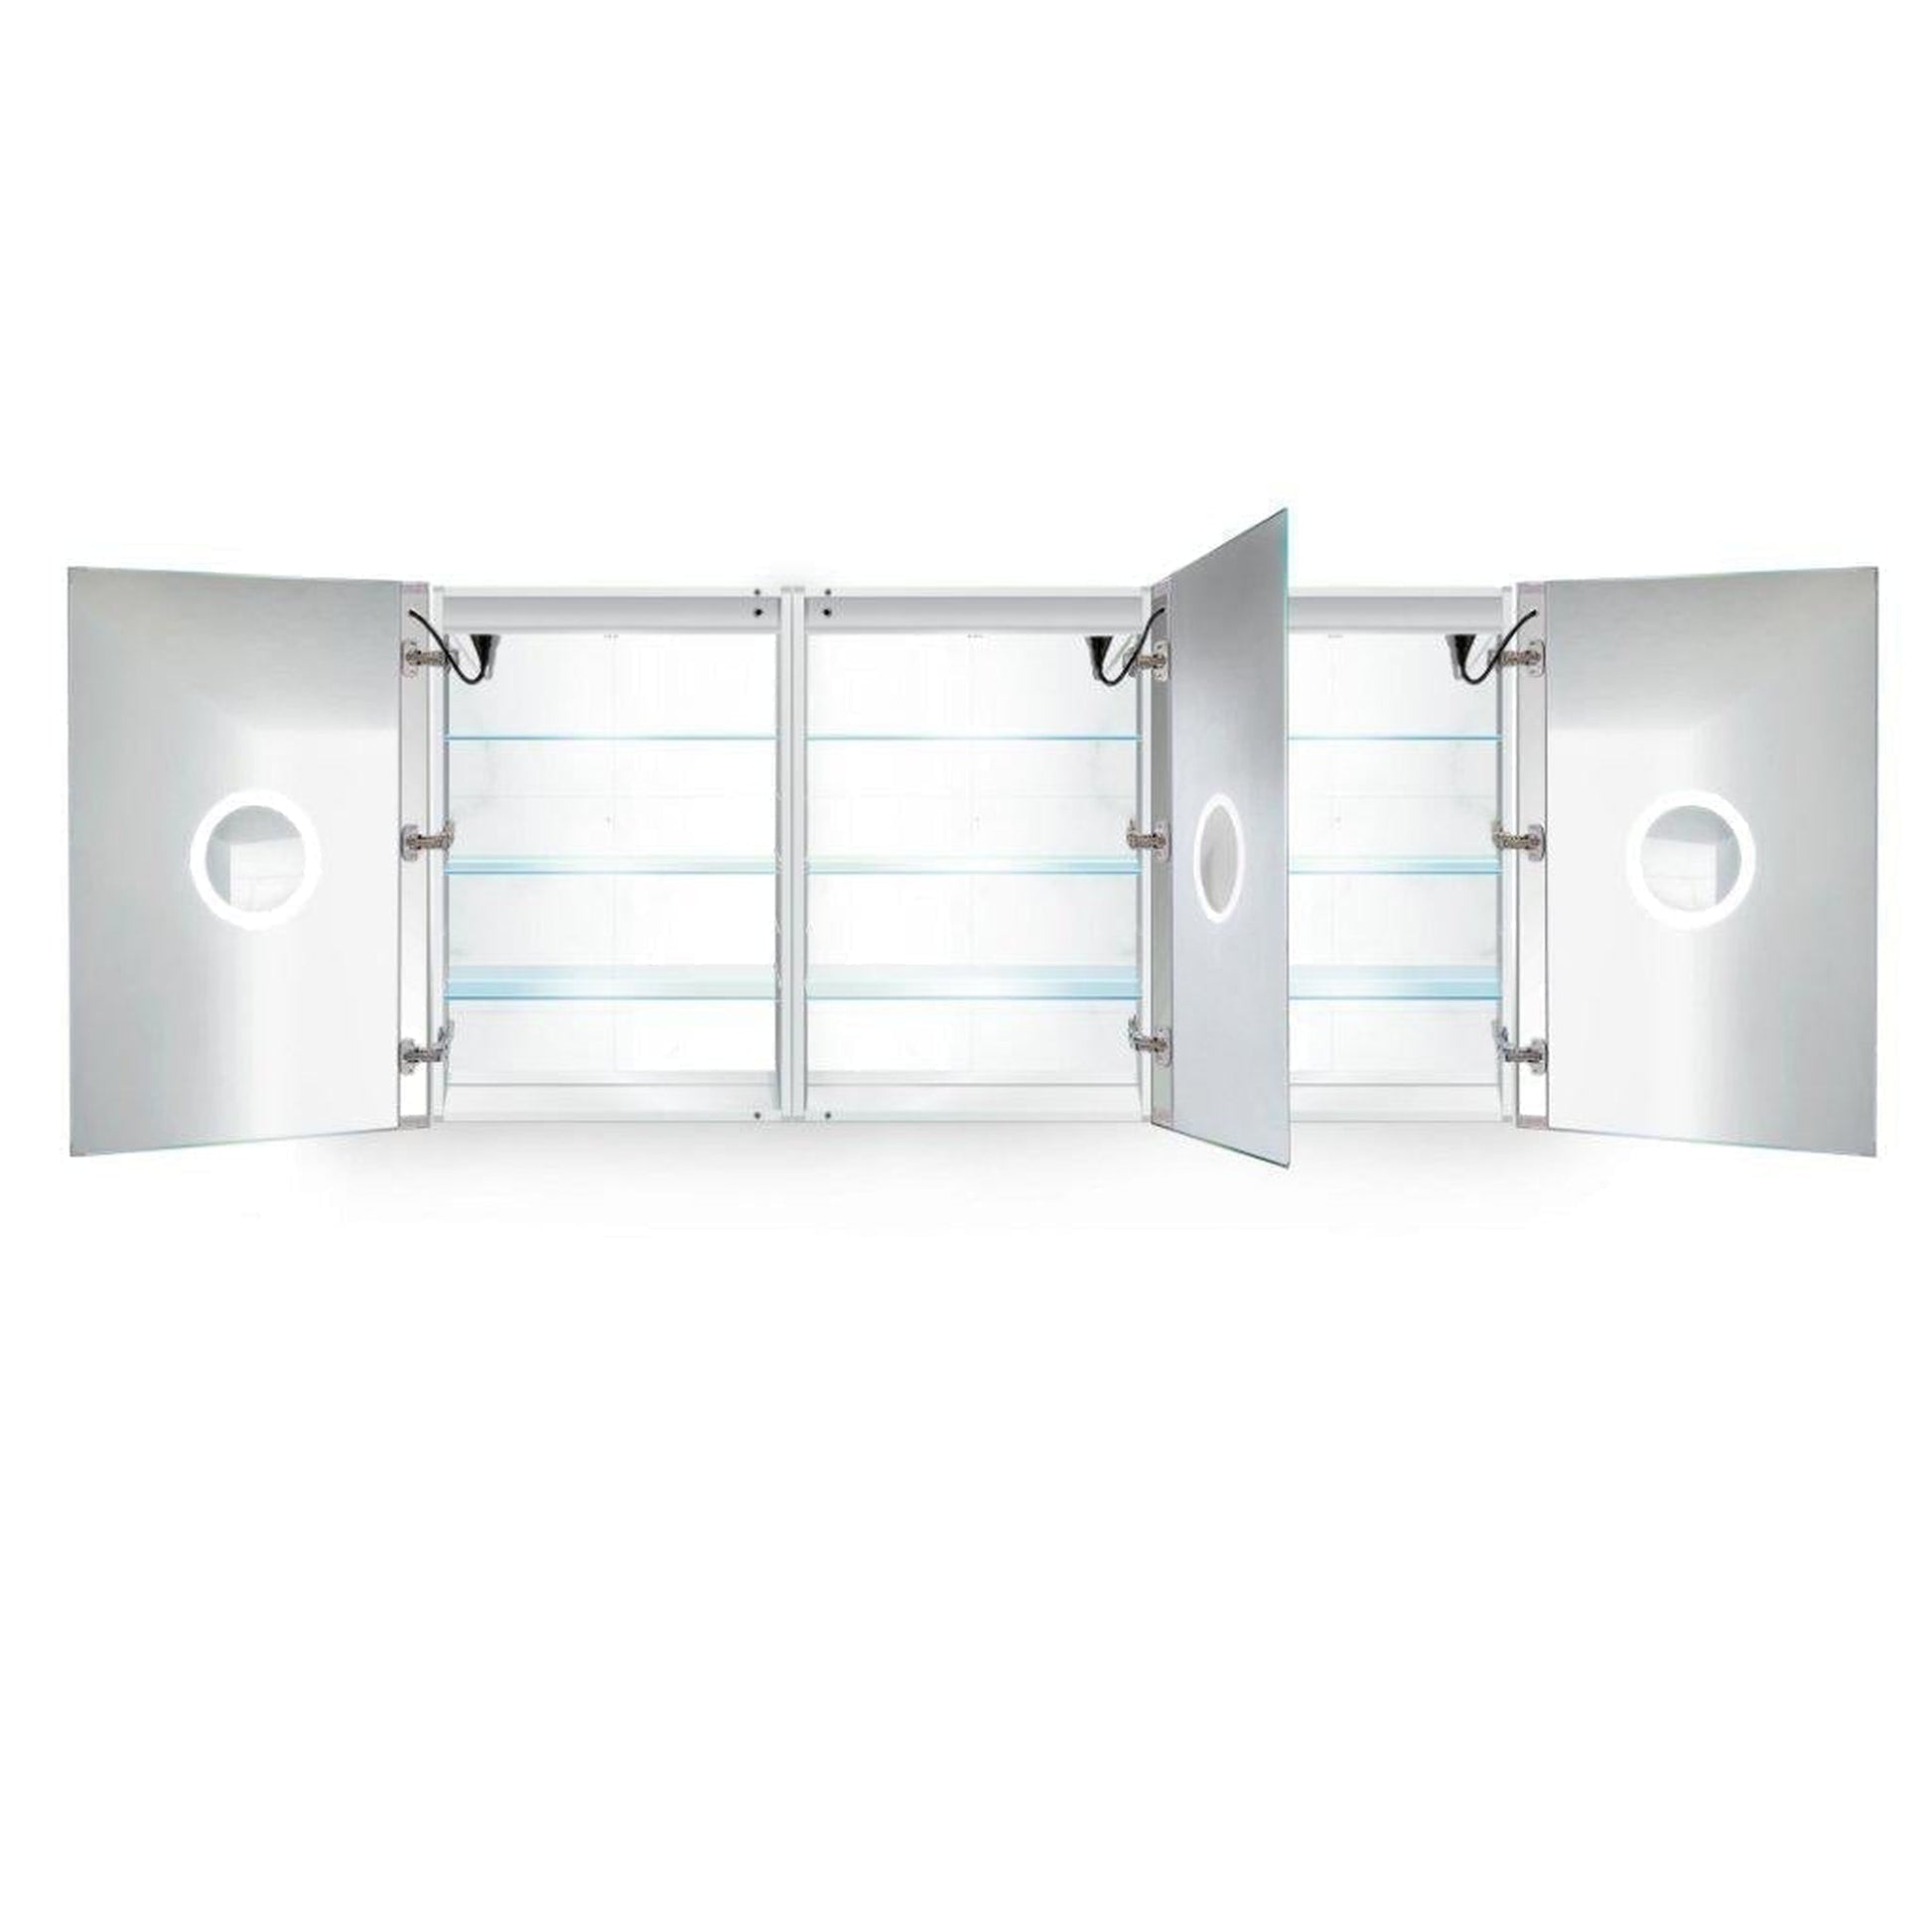 Krugg Reflections Svange 72" x 36" 5000K Tri-View Left-Right-Right Opening Recessed/Surface-Mount Illuminated Silver Backed LED Medicine Cabinet Mirror With Built-in Defogger, Dimmer and Electrical Outlet